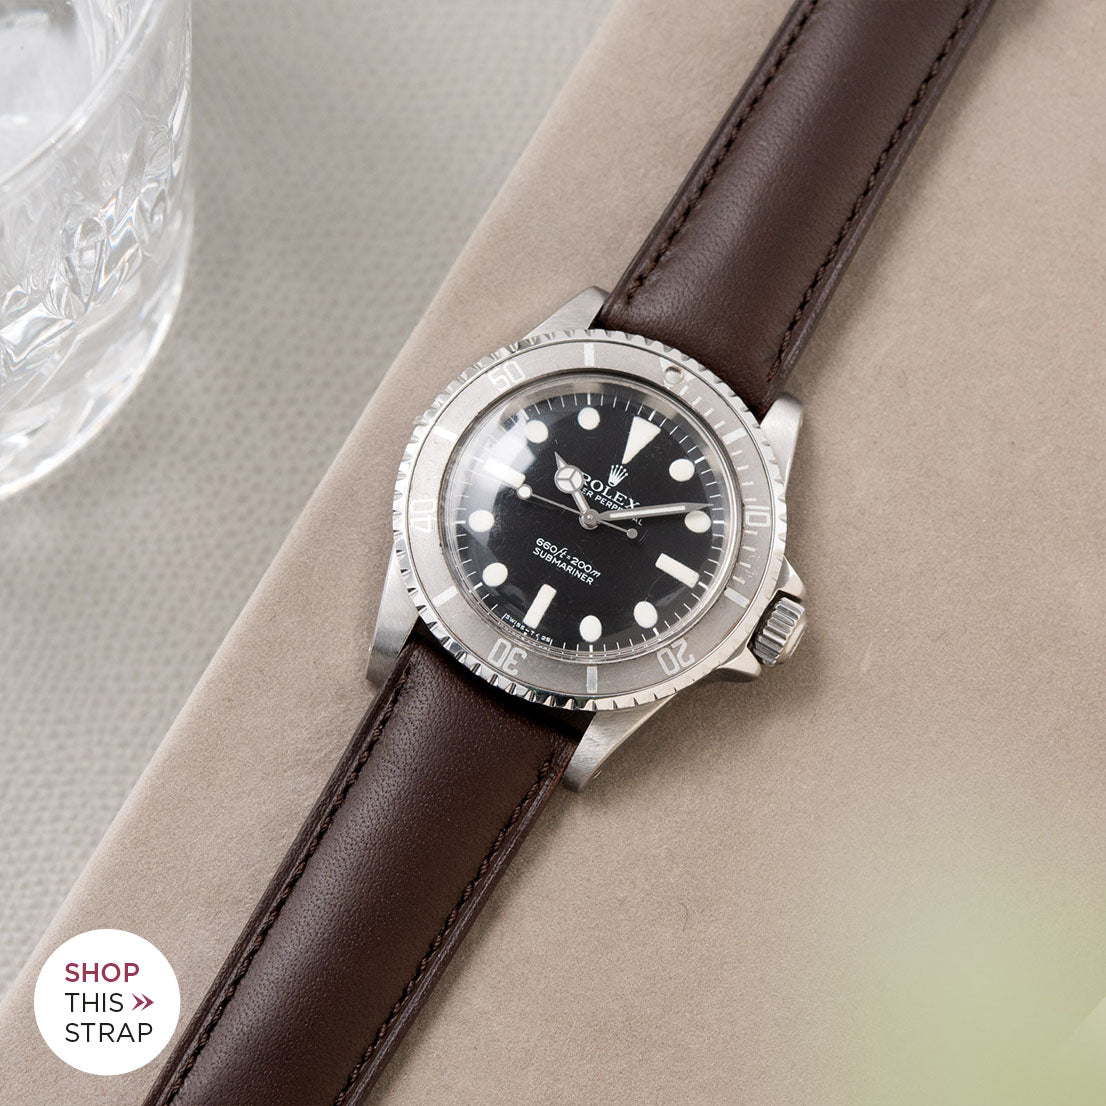 Bulang and Sons_Strap Guide_The Rolex 5513 Faded Maxi Submariner_Antique Brown Leather Watch Strap